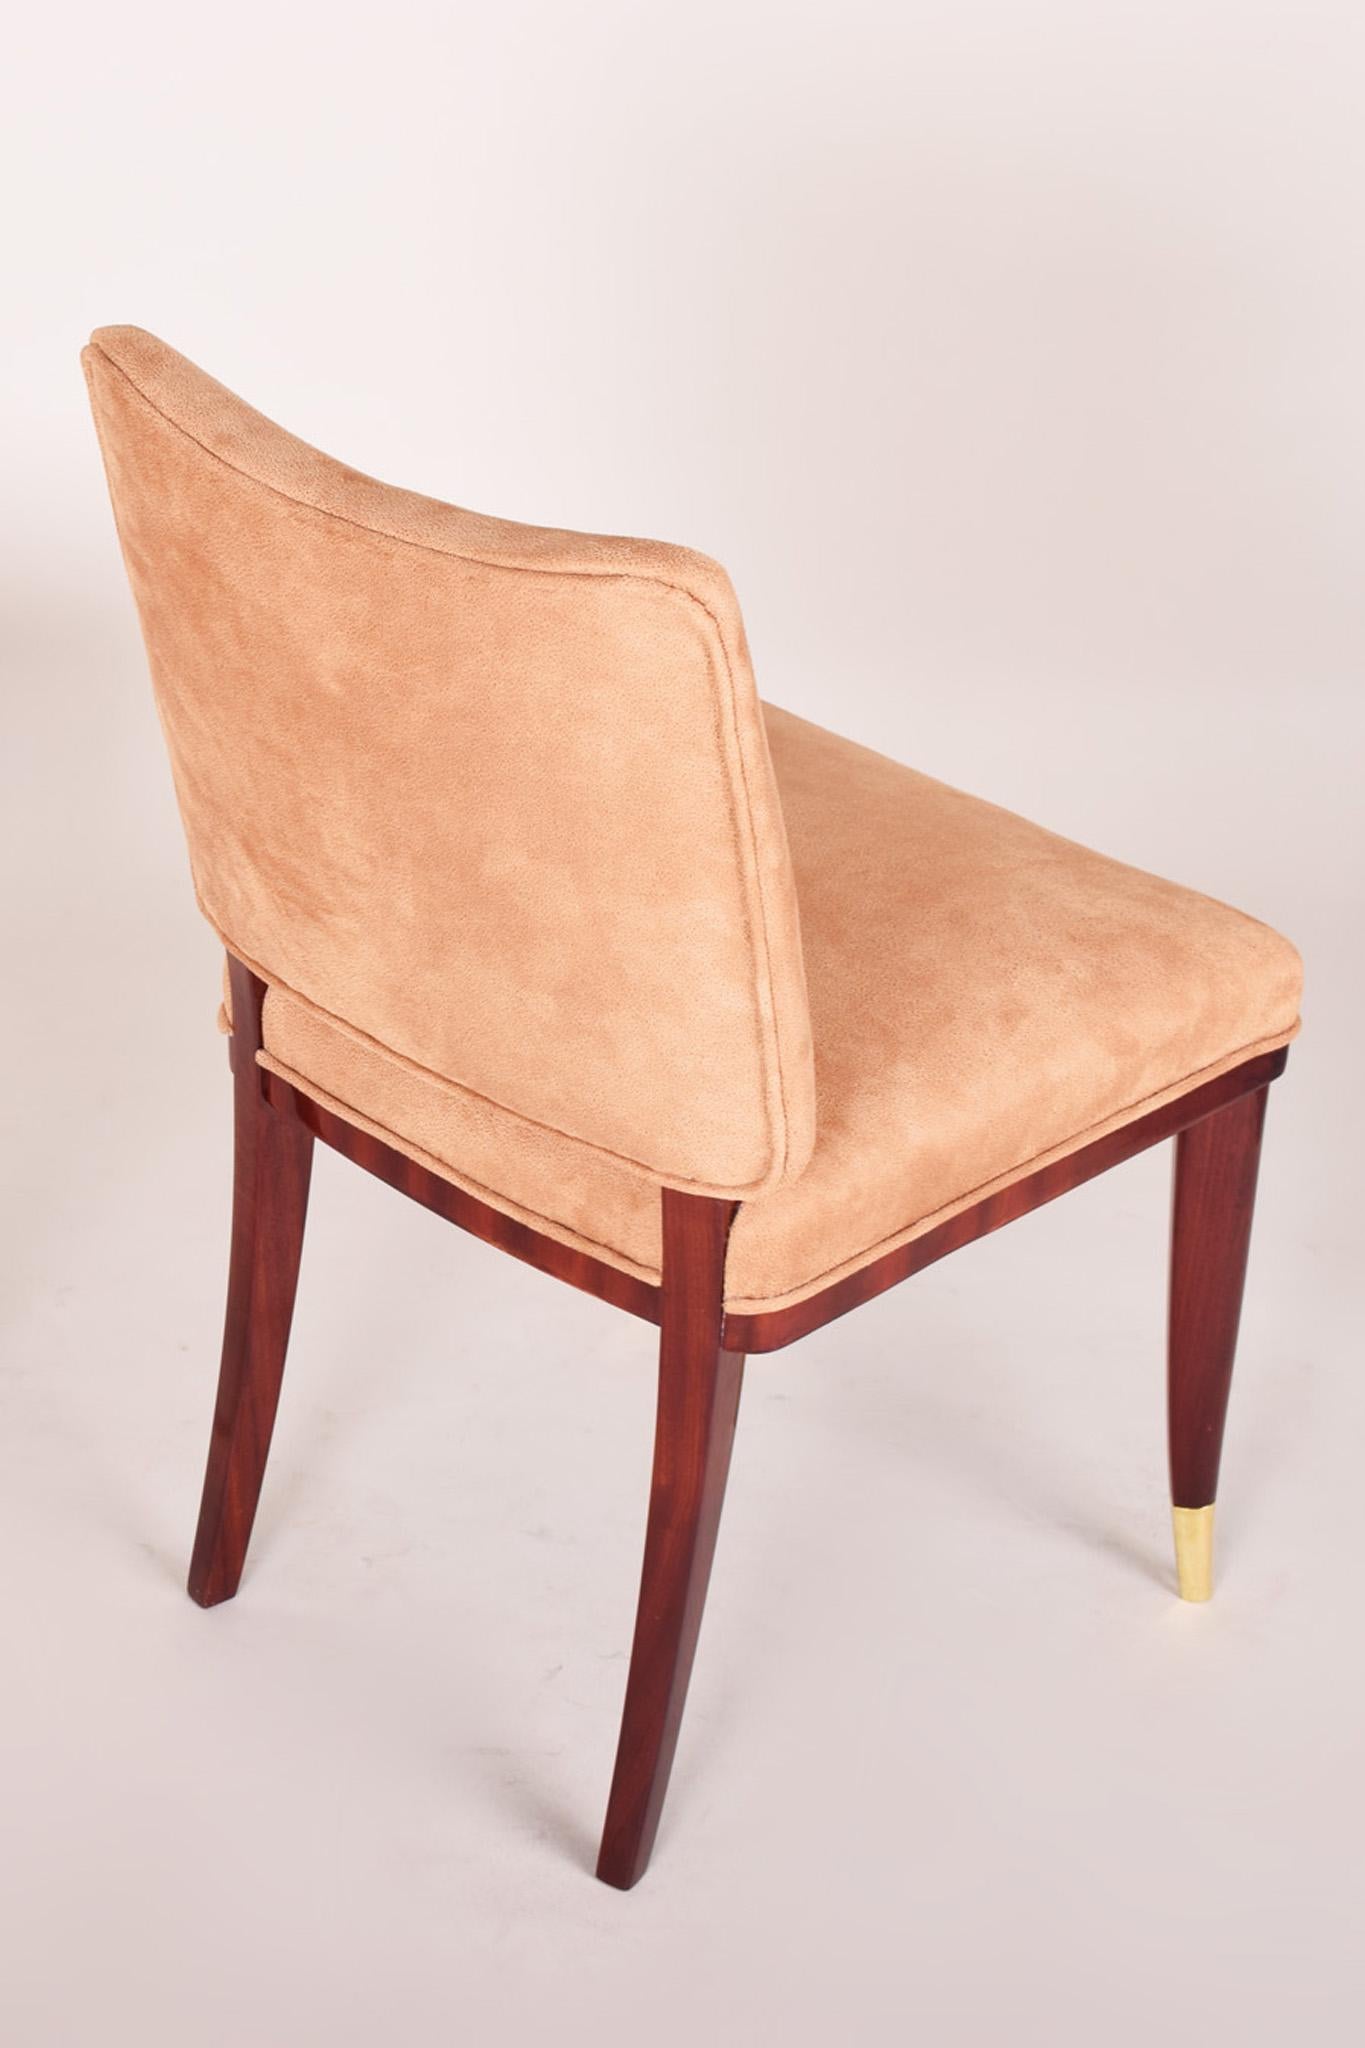 Restored Beige French Art Deco Chair, Designed by Jules Leleu, 1920-1929 For Sale 5